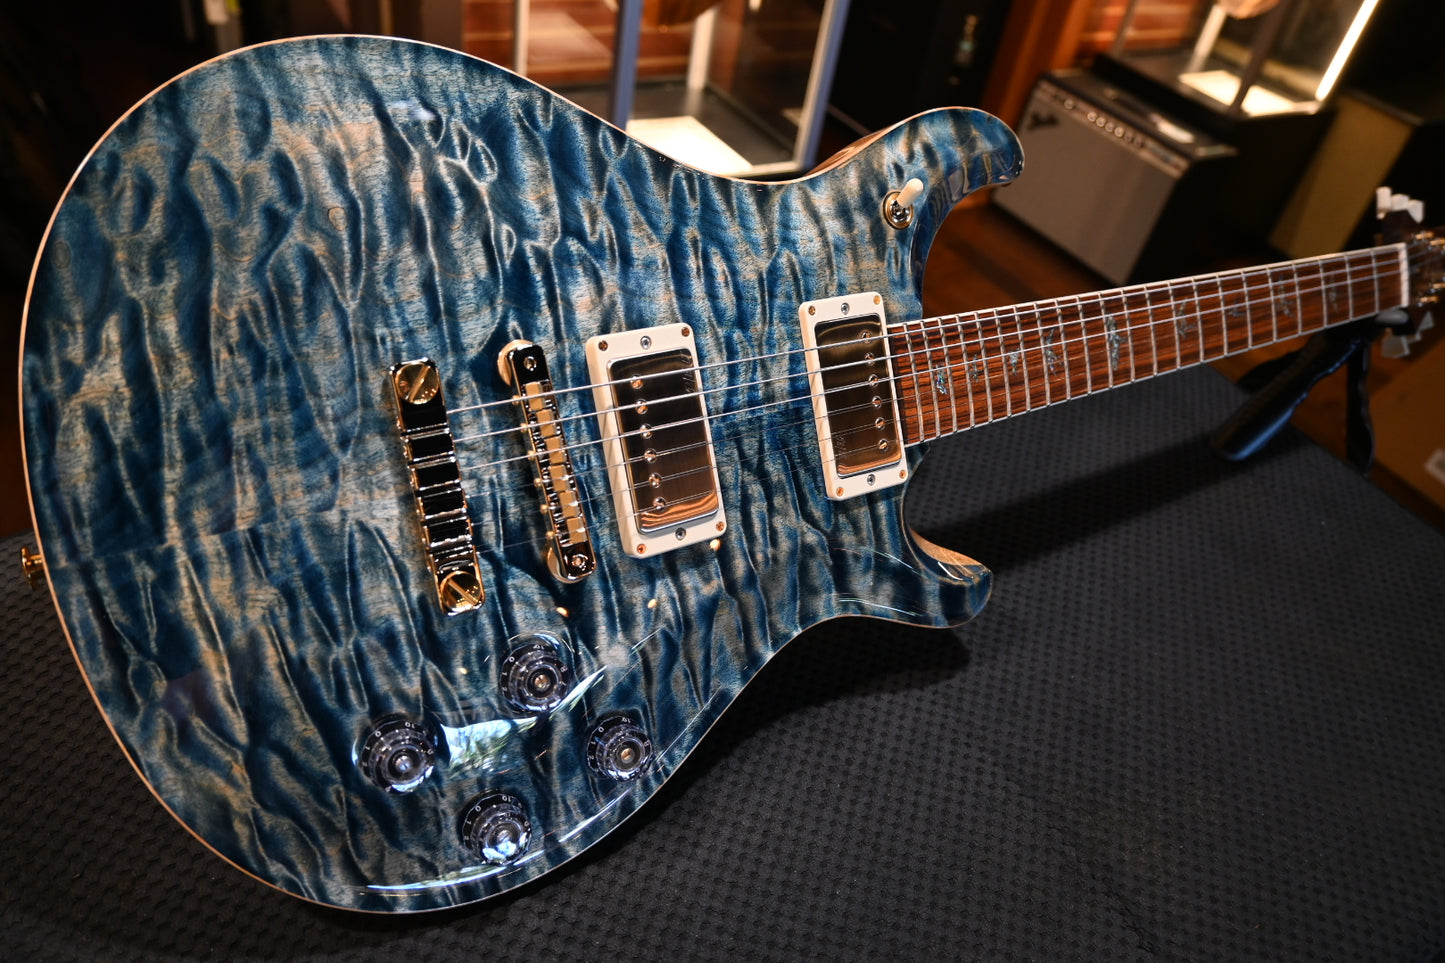 PRS Wood Library McCarty 594 10-Top Quilt Rosewood Neck - Faded Whale Blue Natural Back Guitar #8978 - Danville Music